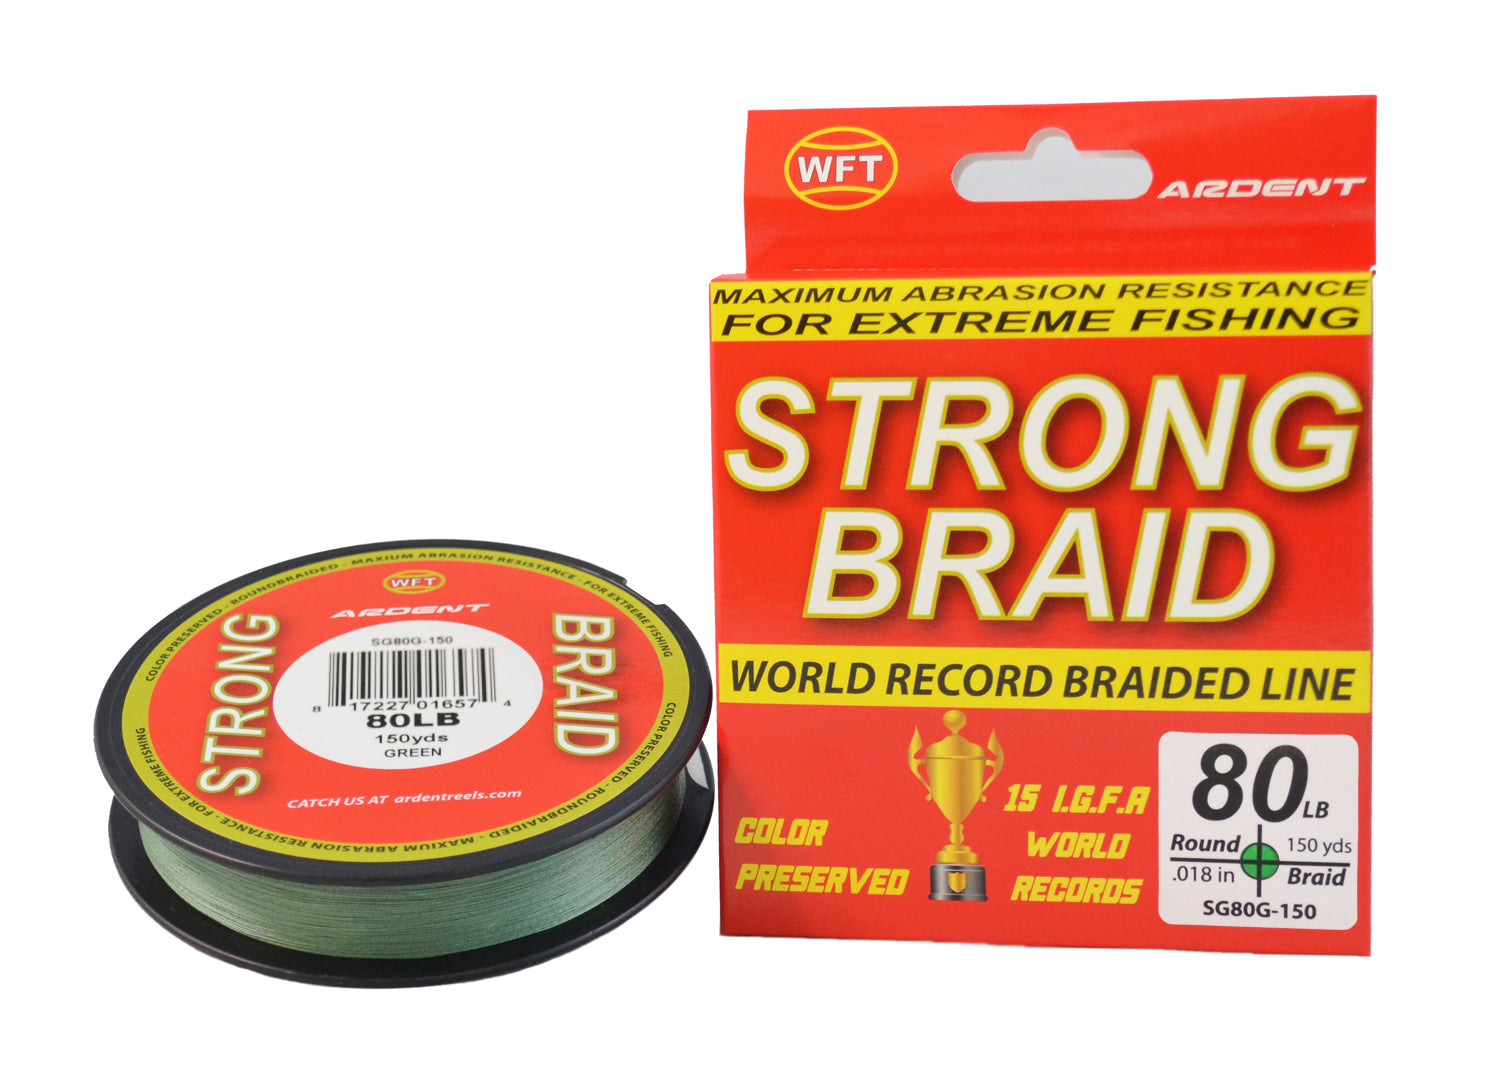 a STRONG BRAID 80LB reel of fishing line and a box 